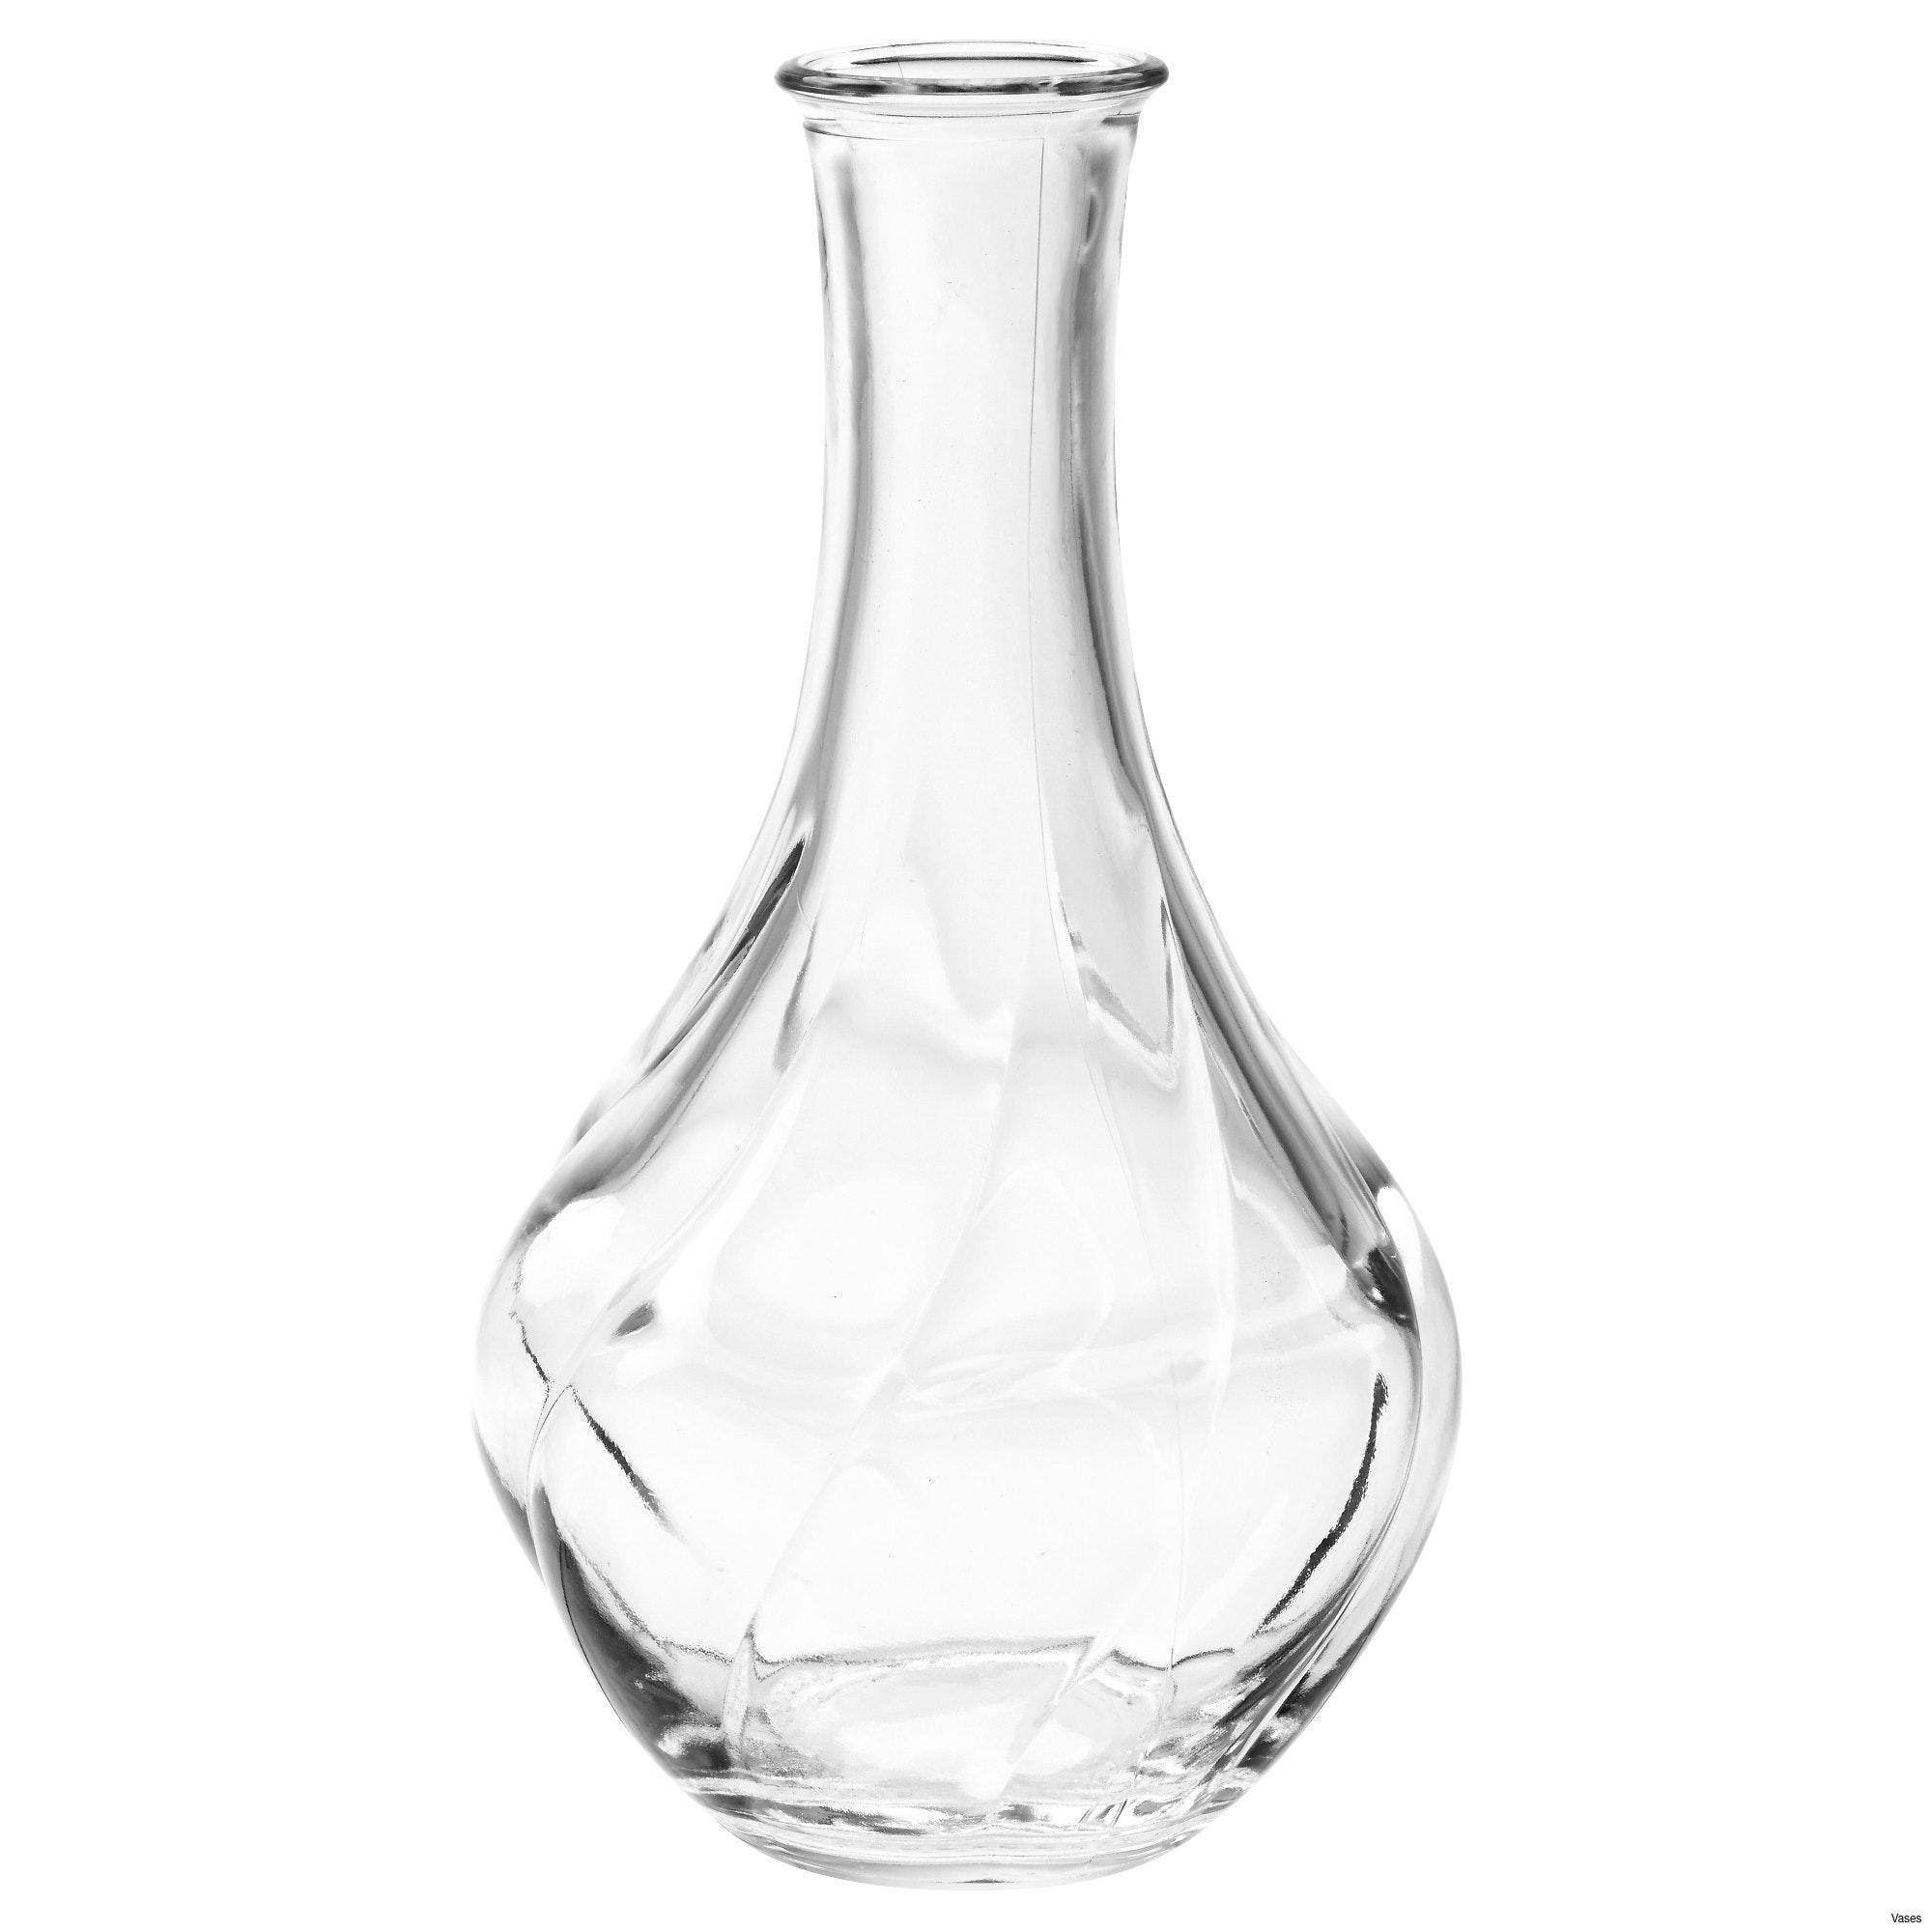 28 Spectacular Perfume Bottle Vase 2024 free download perfume bottle vase of collection of extra large glass vase vases artificial plants throughout extra large glass vase image living room glass vases fresh clear vase 0d tags amazing and